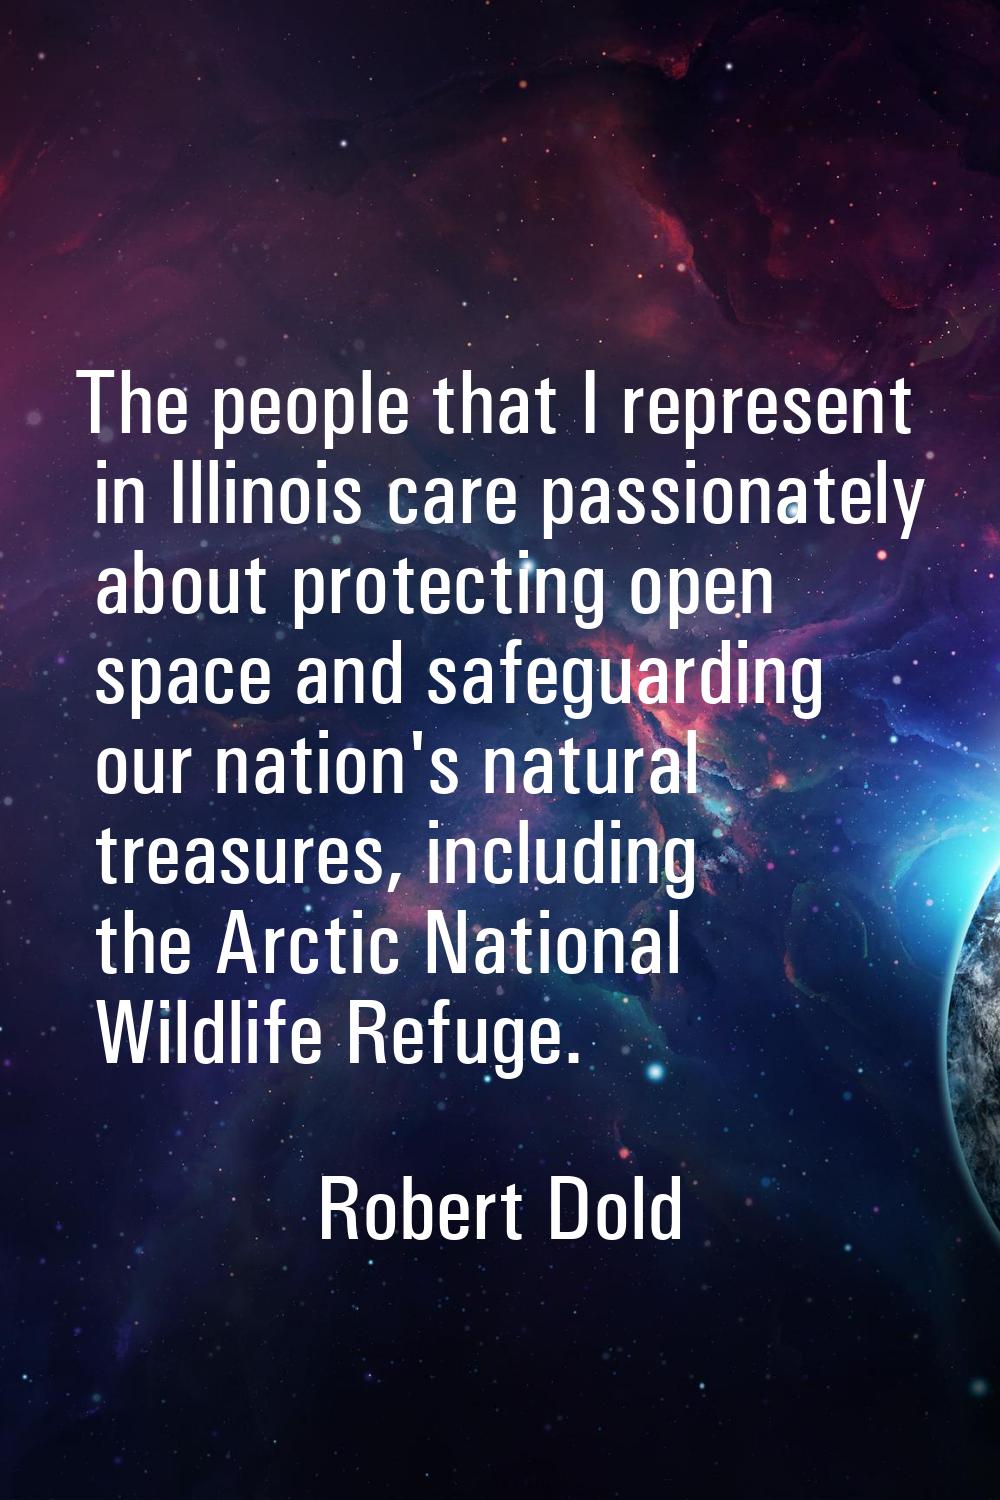 The people that I represent in Illinois care passionately about protecting open space and safeguard